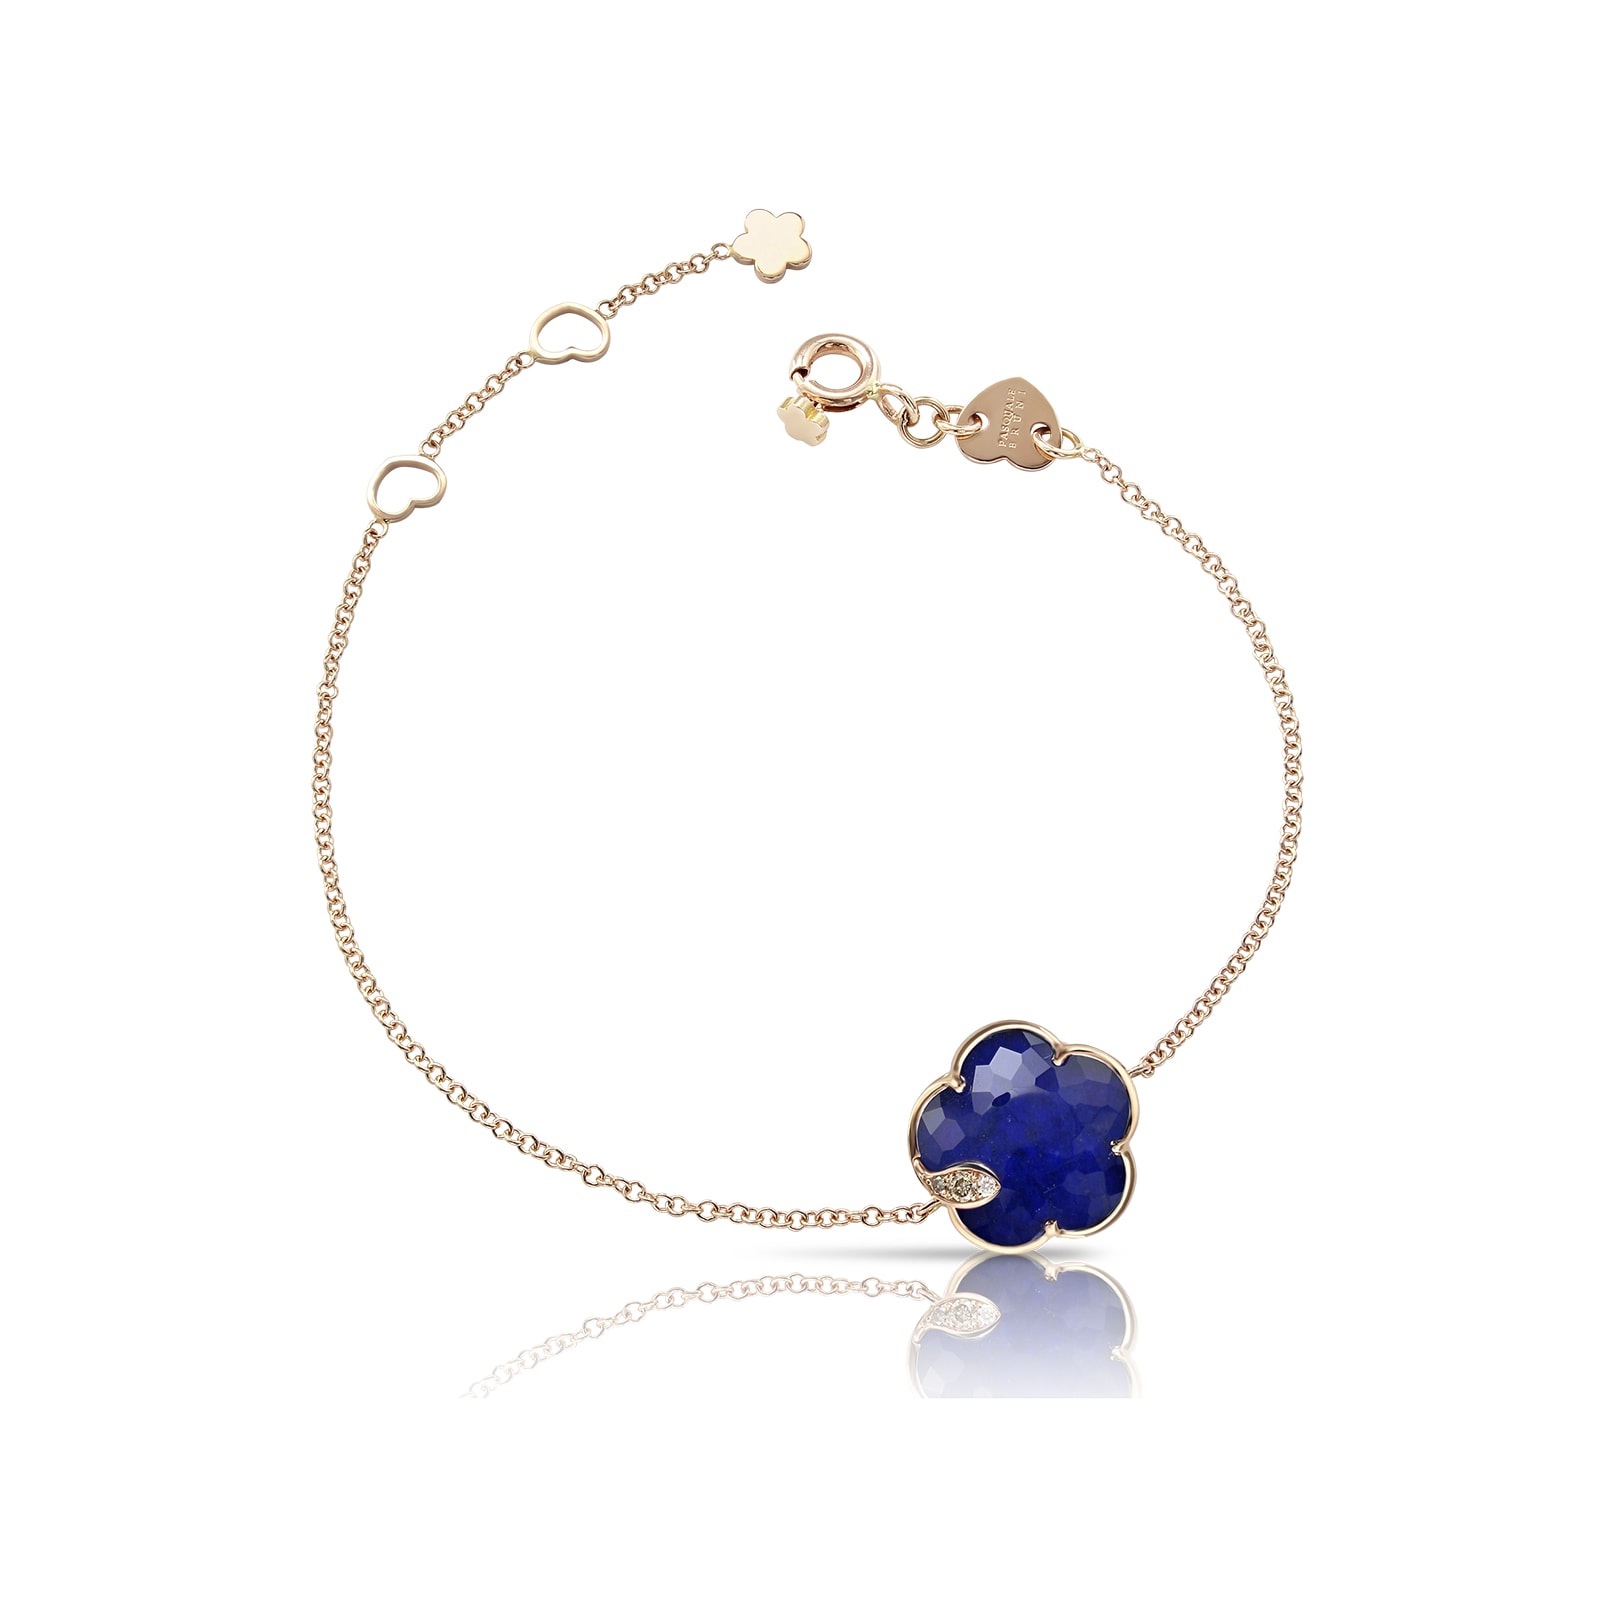 Petit Joli Bracelet in 18ct Rose Gold with Rock Crystal and Lapis Lazuli doublet and Diamonds